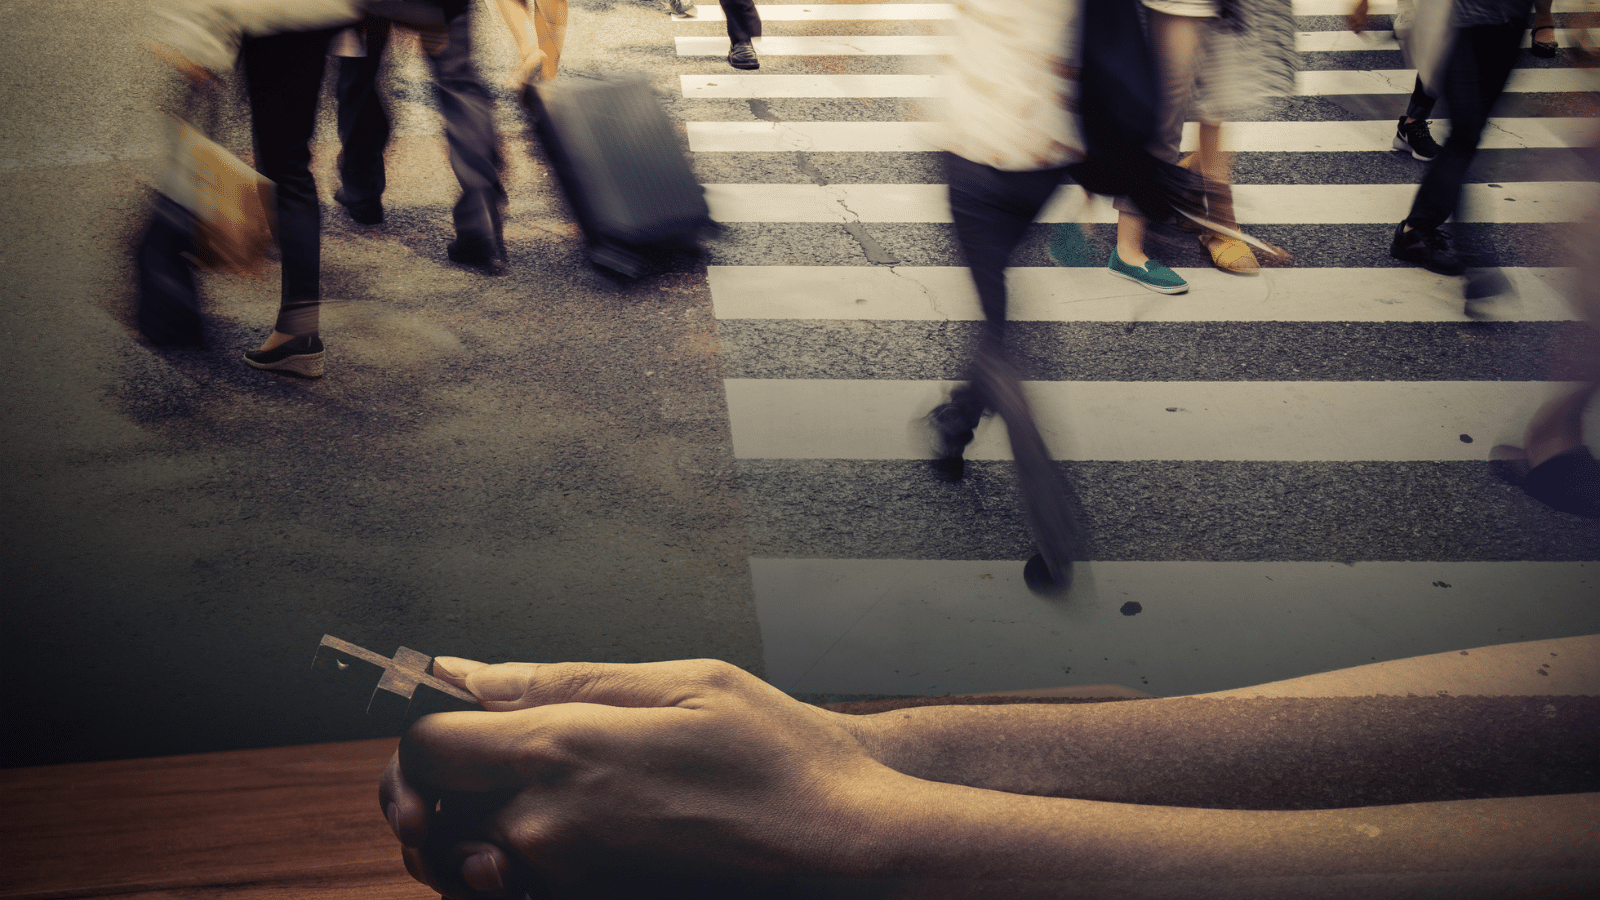 A double exposure image of people on a busy crosswalk and praying hands.